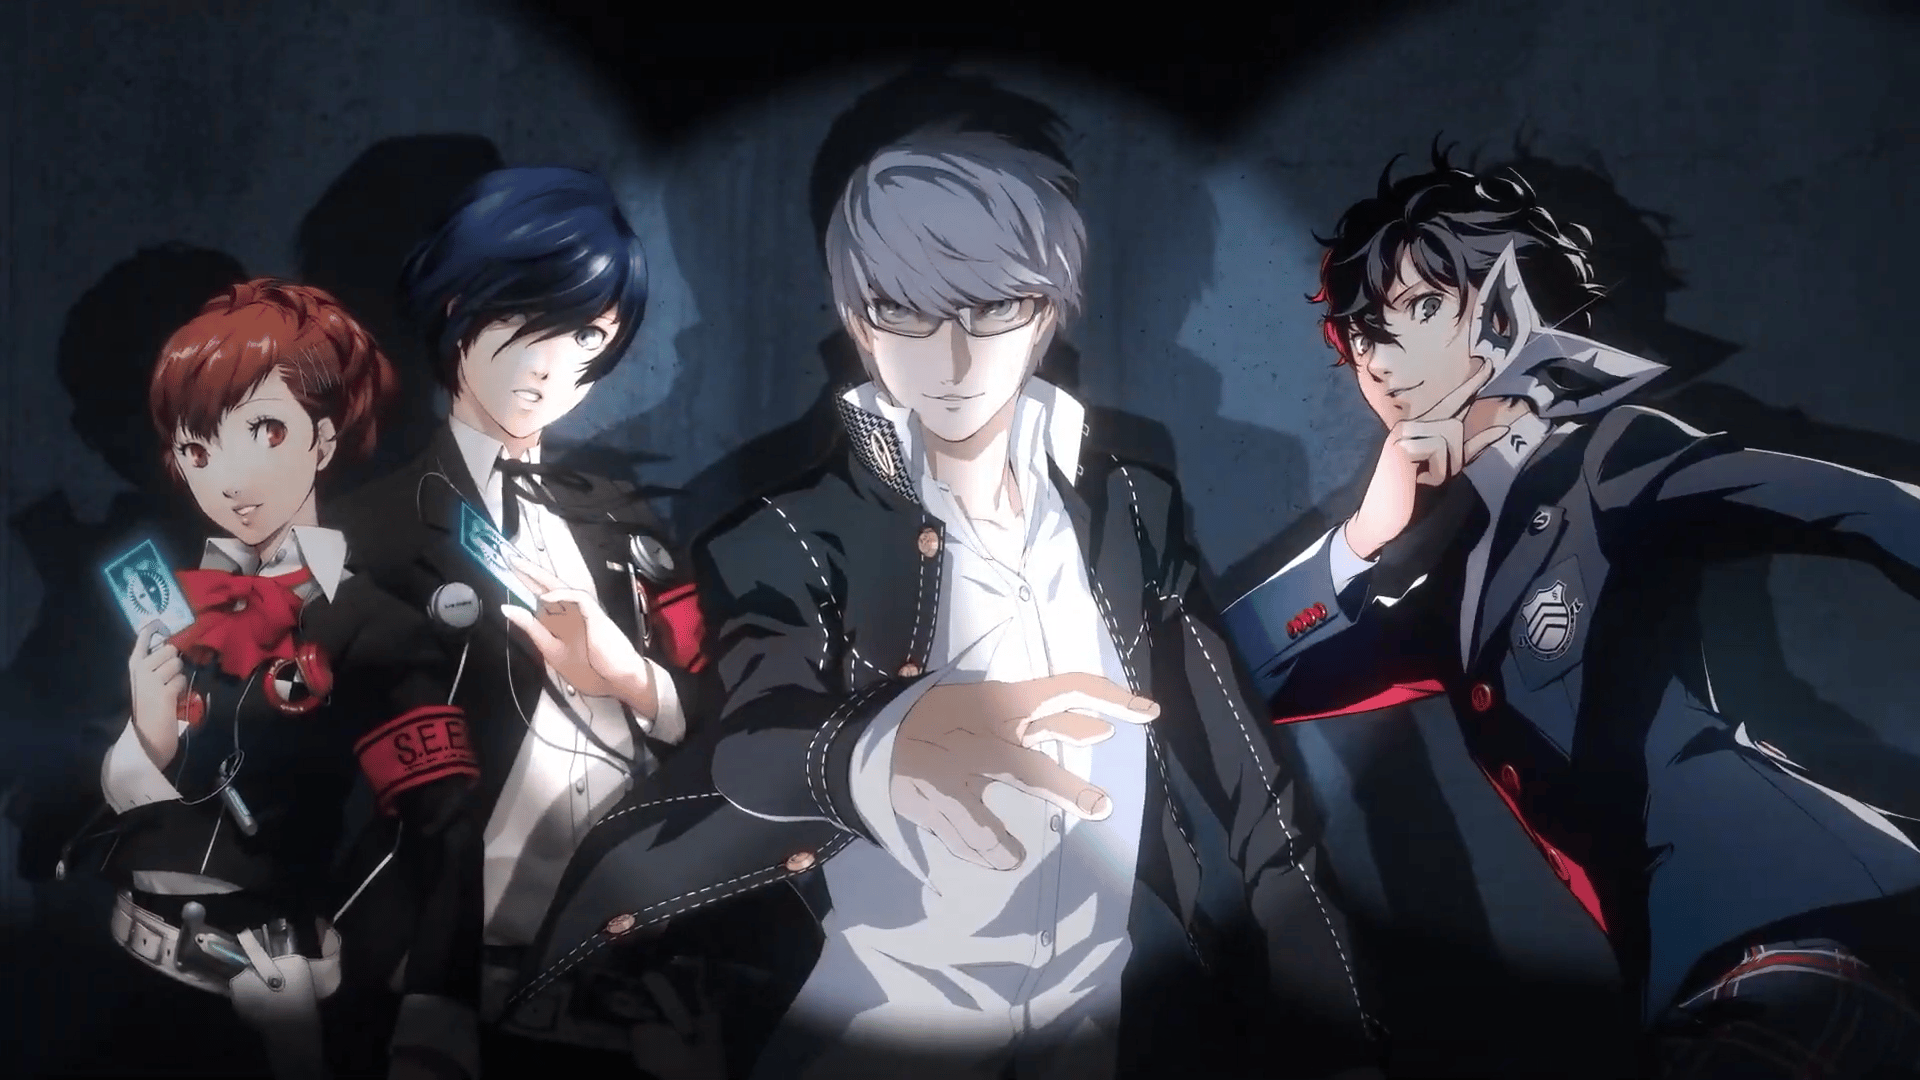 [UPDATES] Persona 3 Portable, Persona 4 Golden & Persona 5 Royal Confirmed for PC, PS, & Xbox One & Series X|S